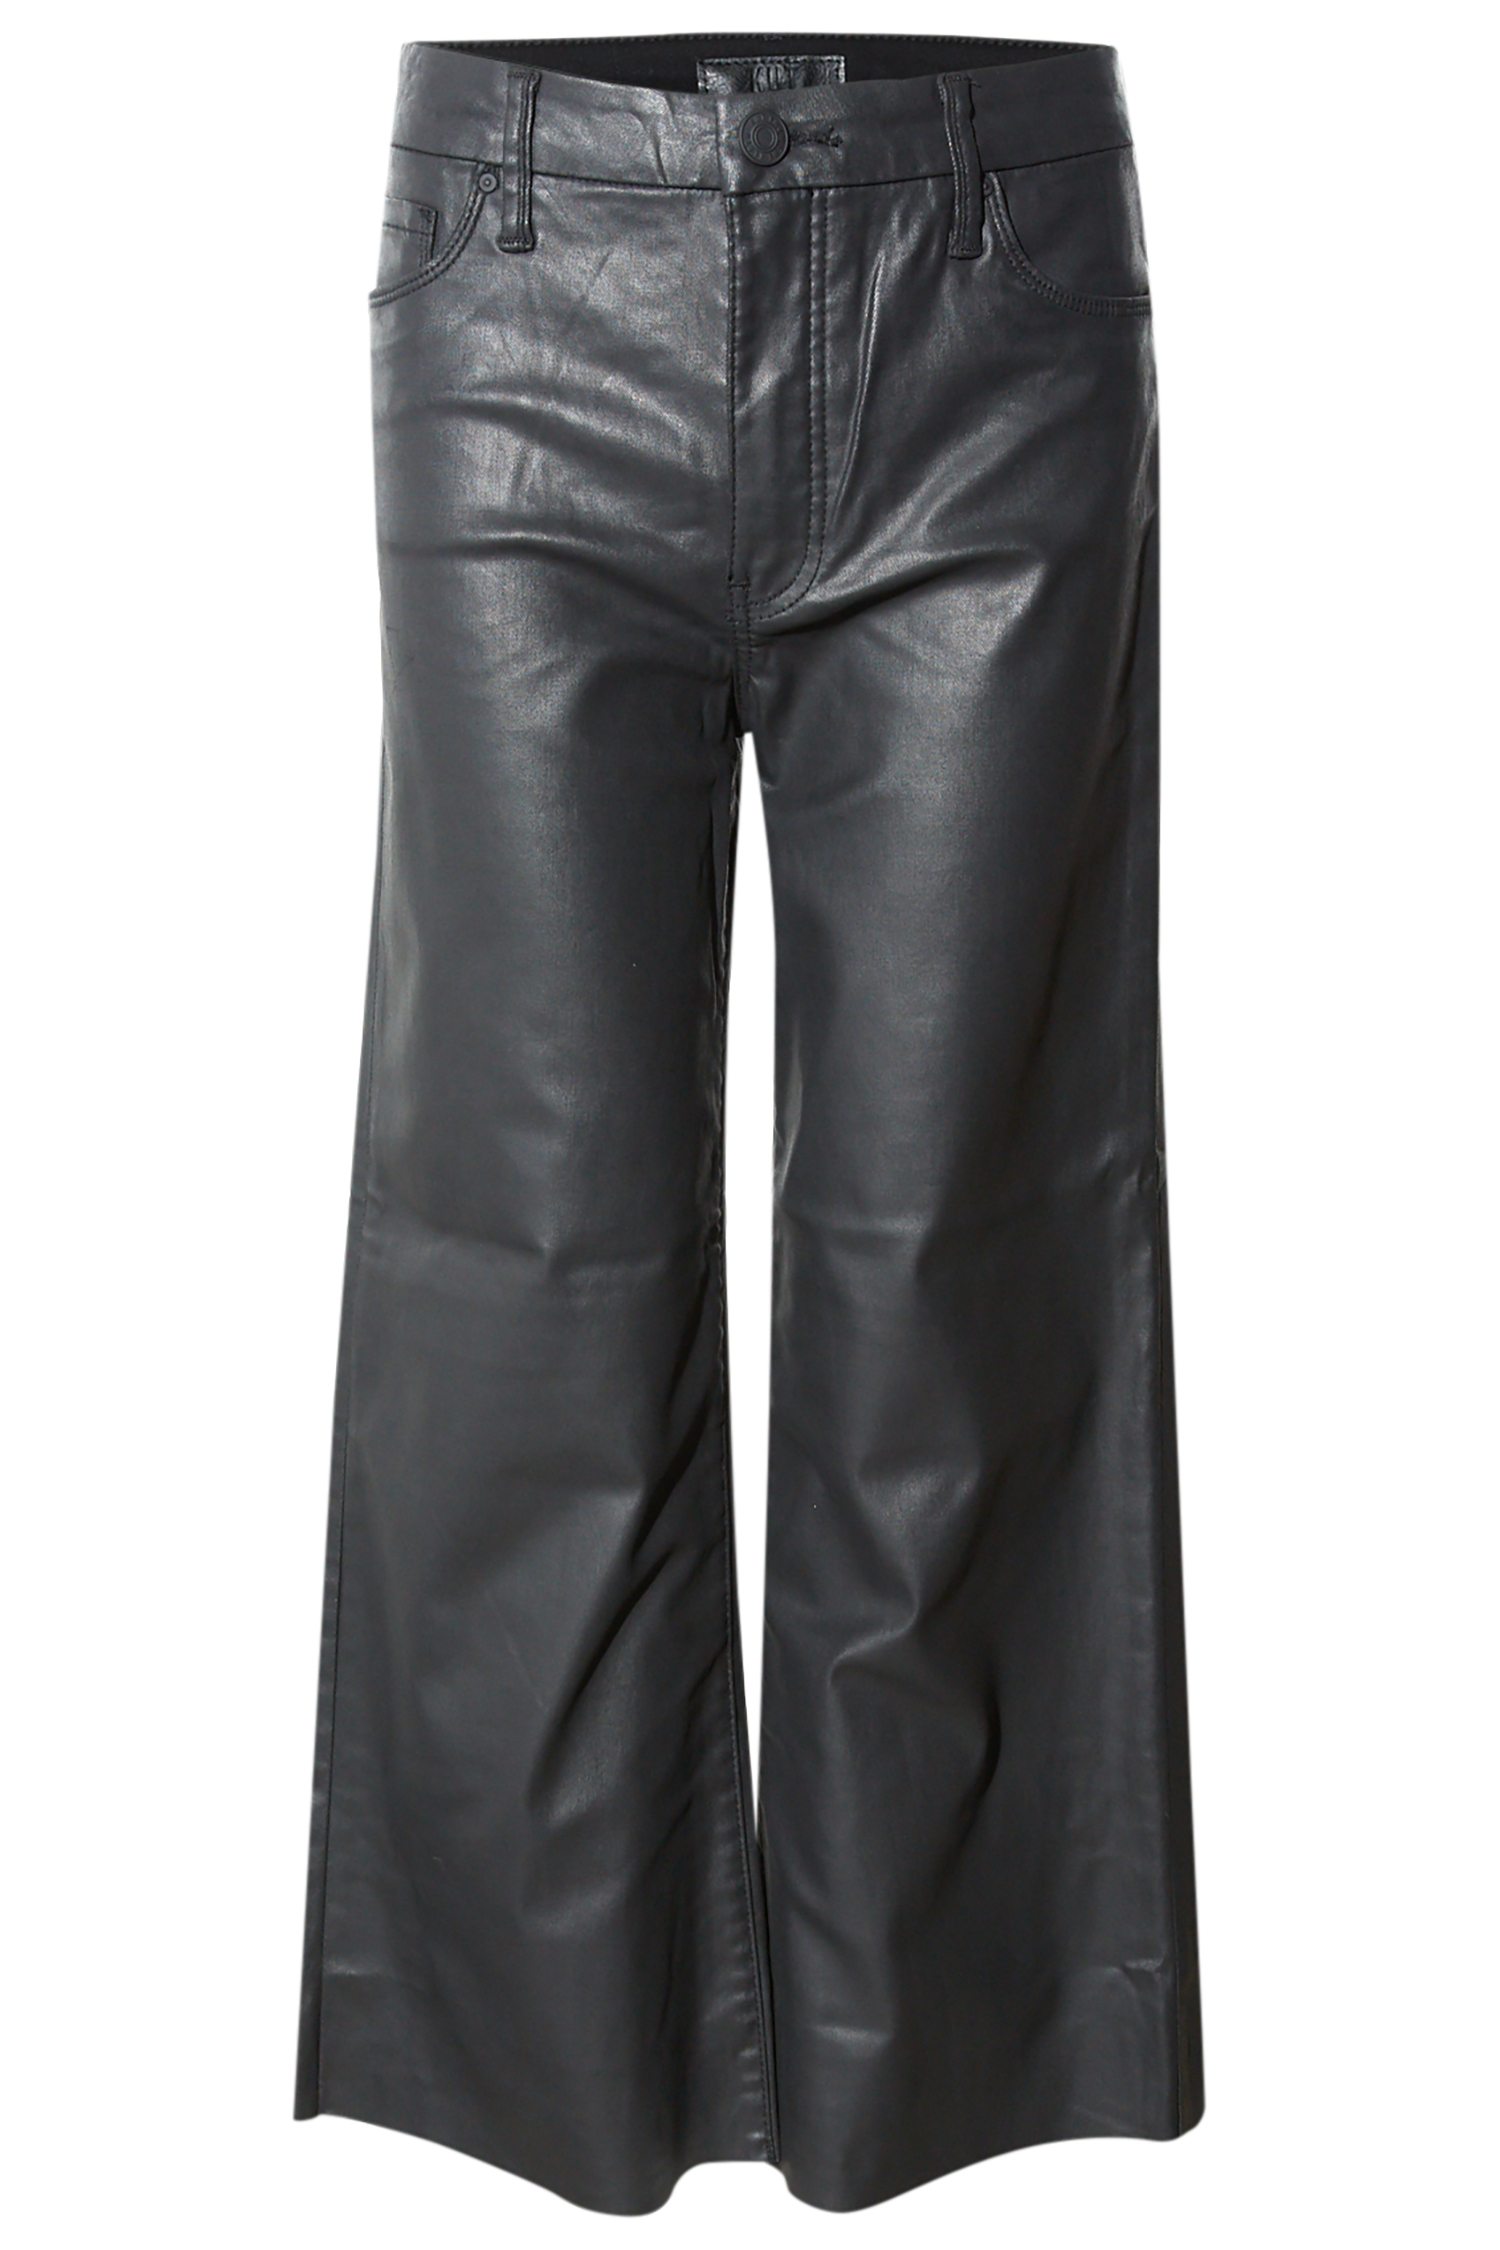 KUT from the Kloth Meg Coated High Rise Wide Leg in Black | DAILYLOOK